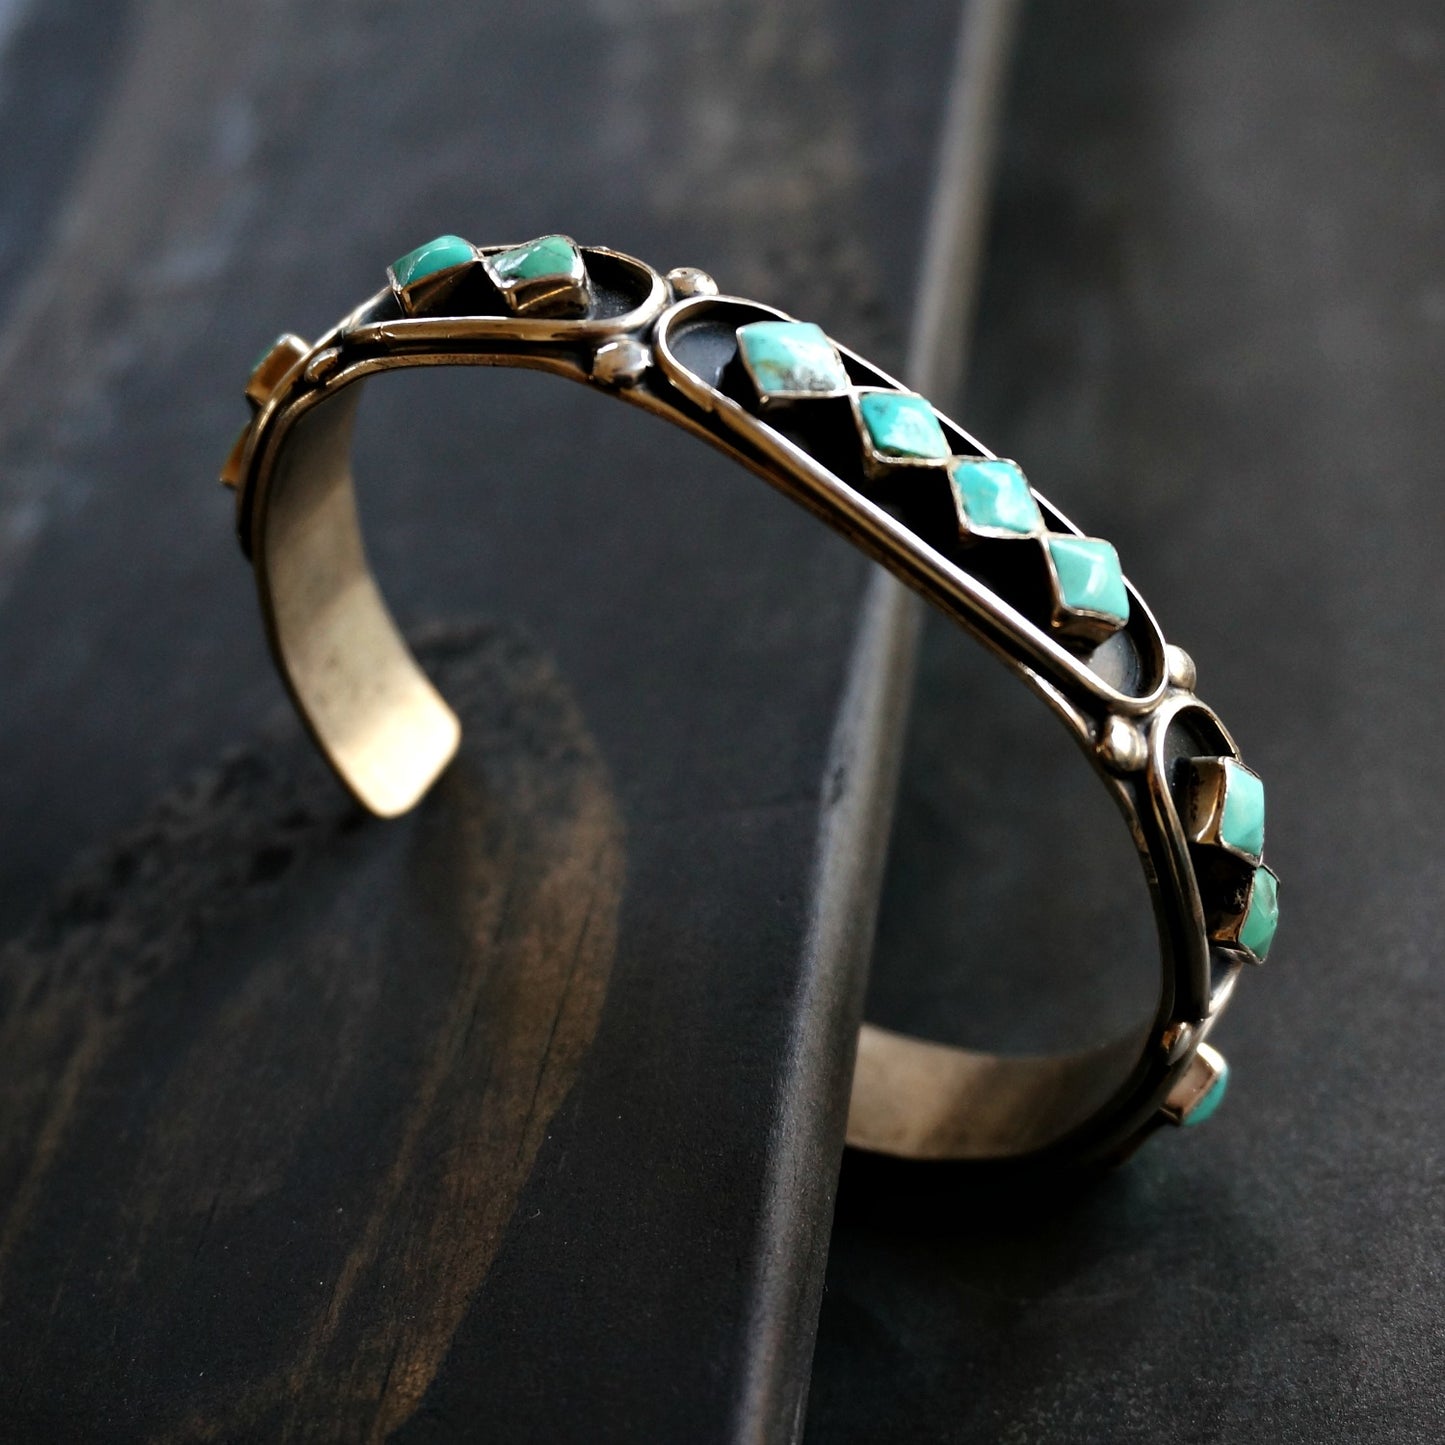 Load image into Gallery viewer, Nina Vintage Turquoise Bracelet - SOWELL JEWELRY
